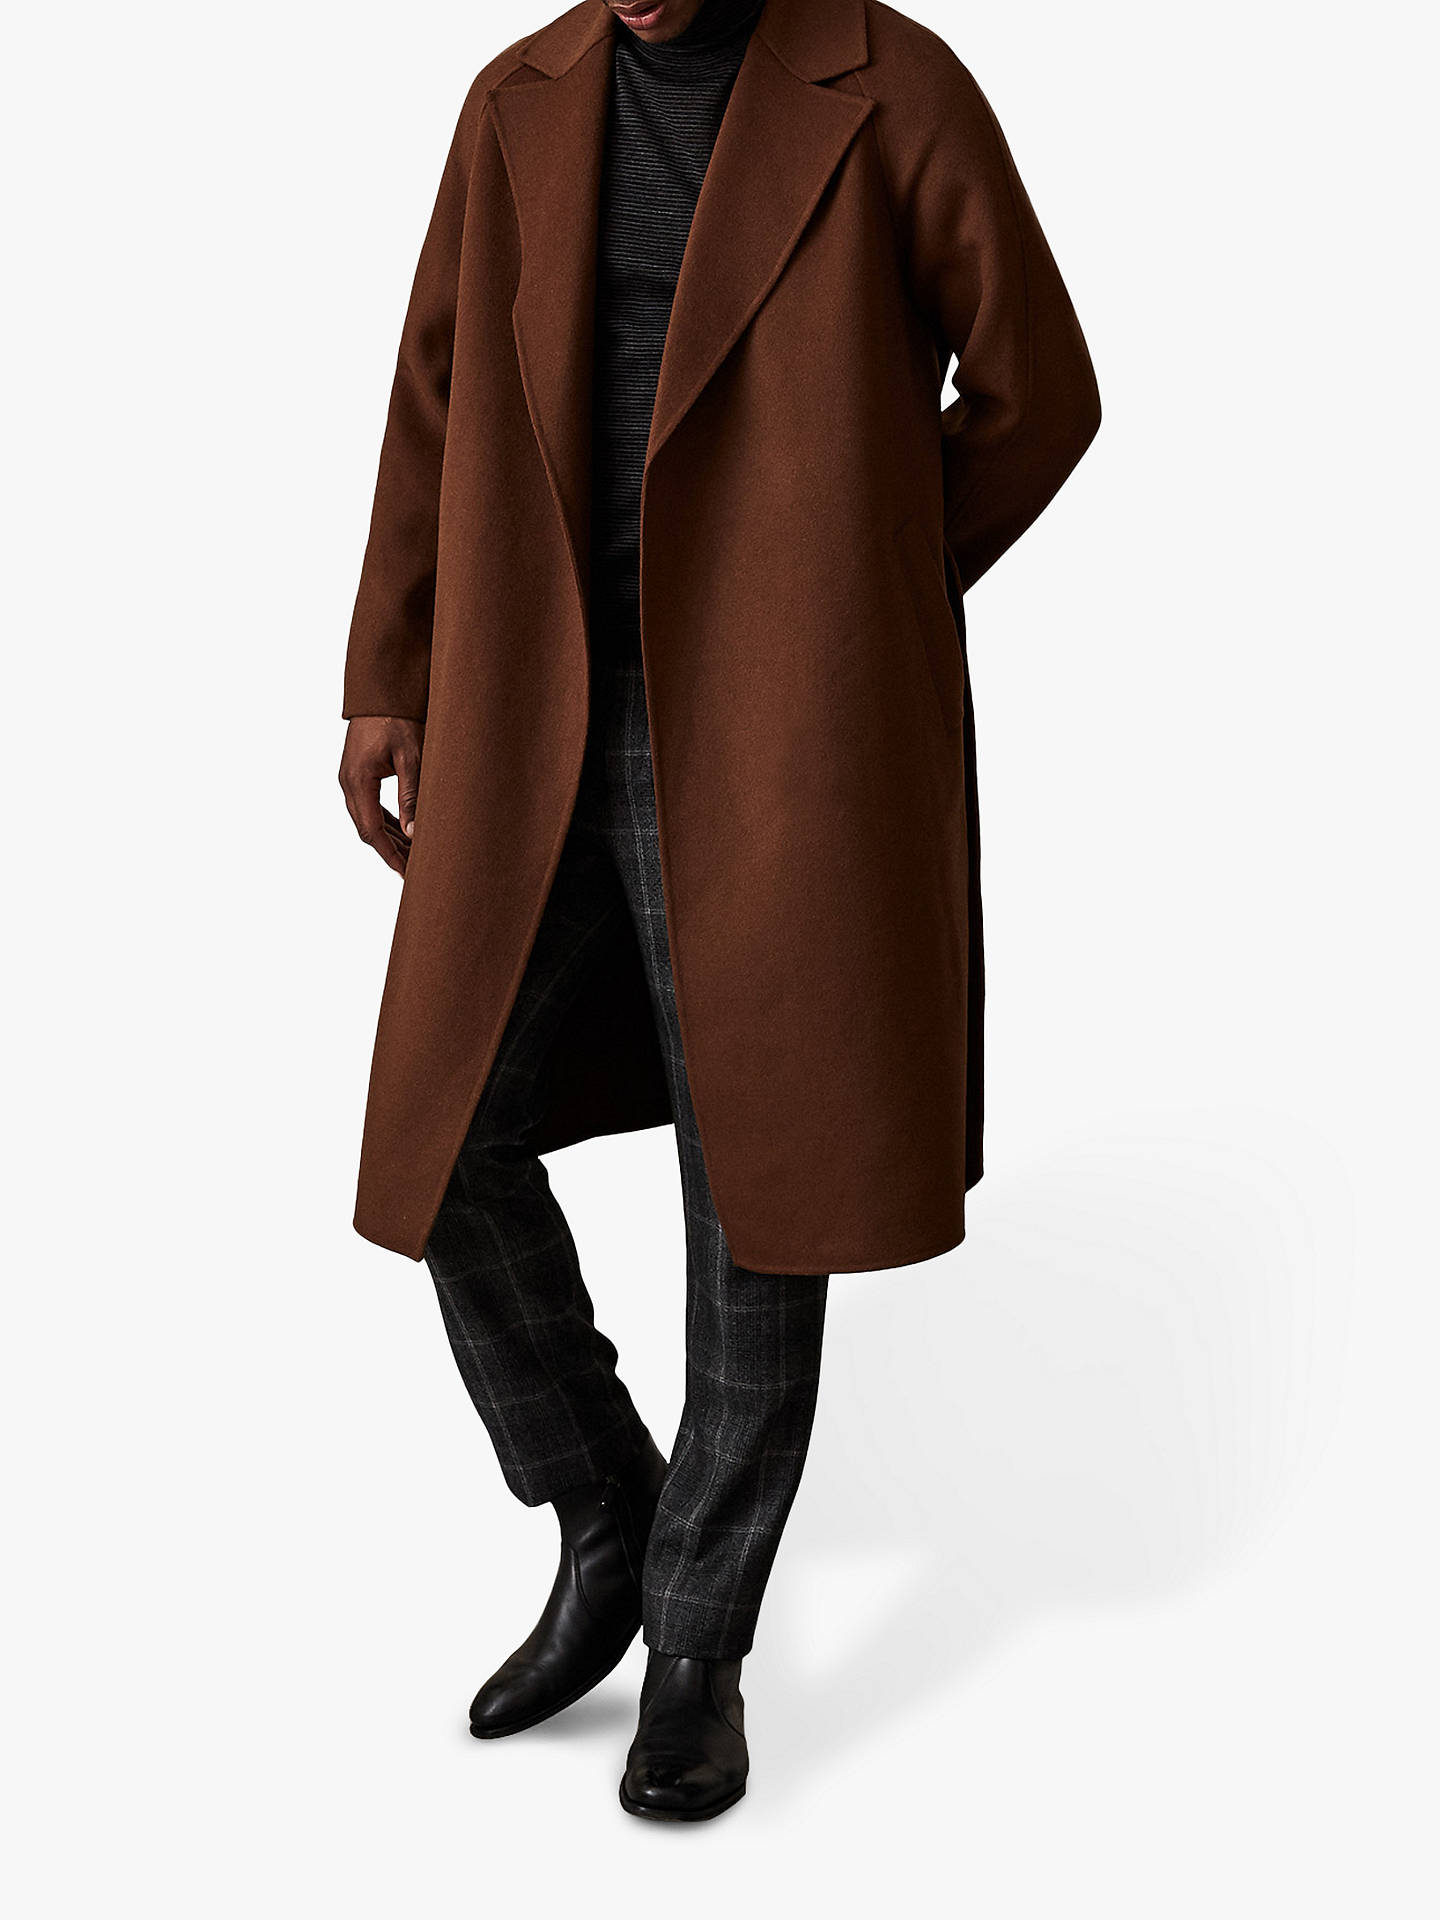 Reiss Vincent Belted Wool Overcoat, Tobacco at John Lewis & Partners